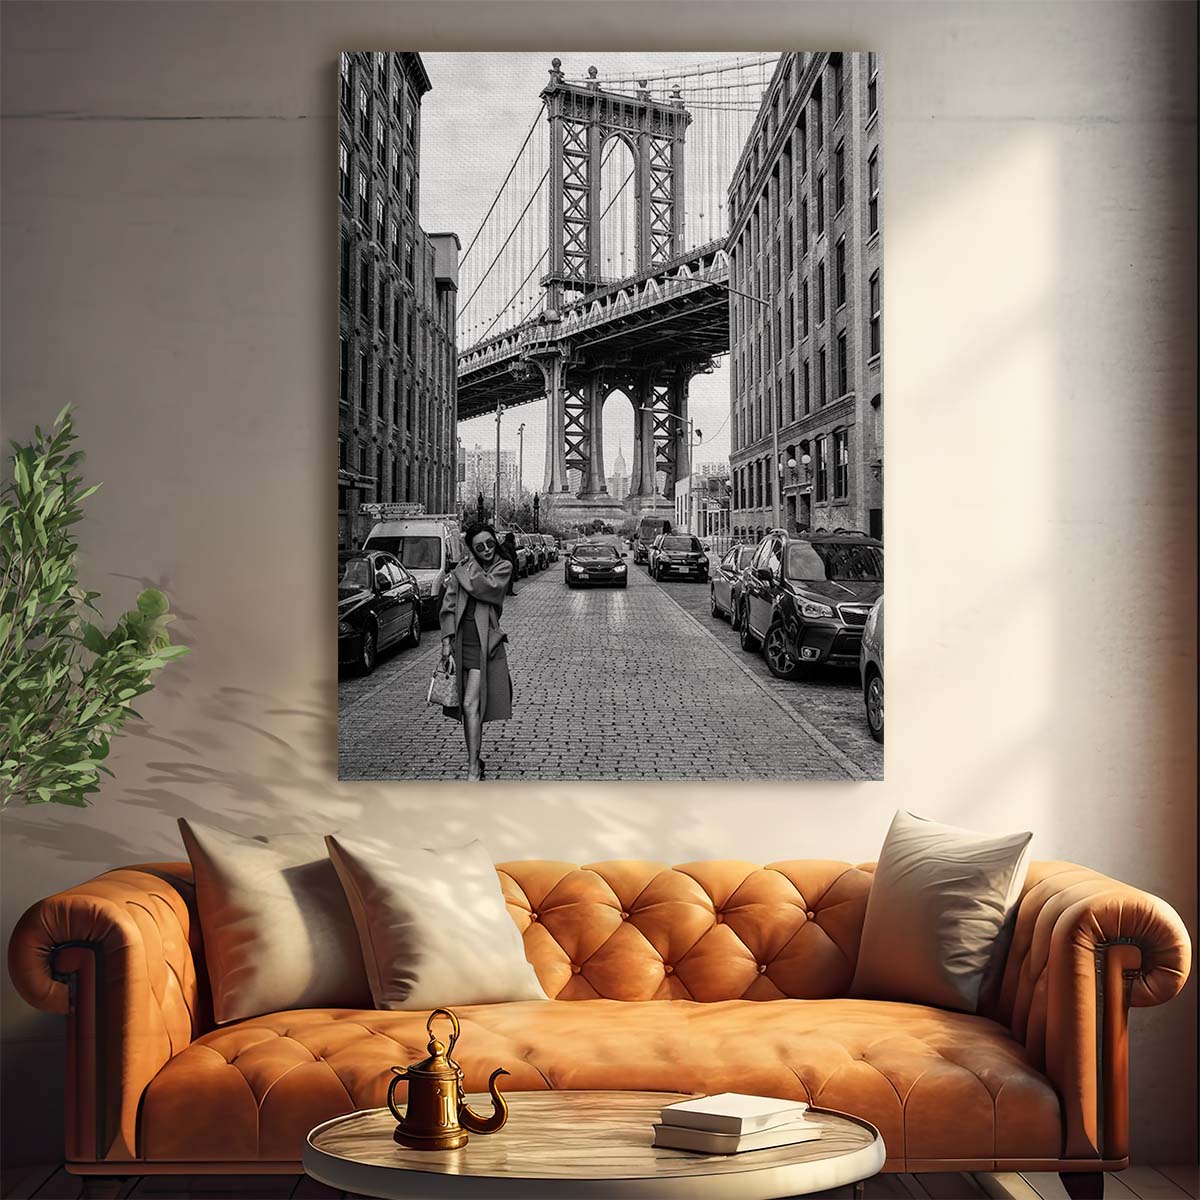 Brooklyn BW Photography Woman Walking by Iconic Manhattan Bridge by Luxuriance Designs, made in USA